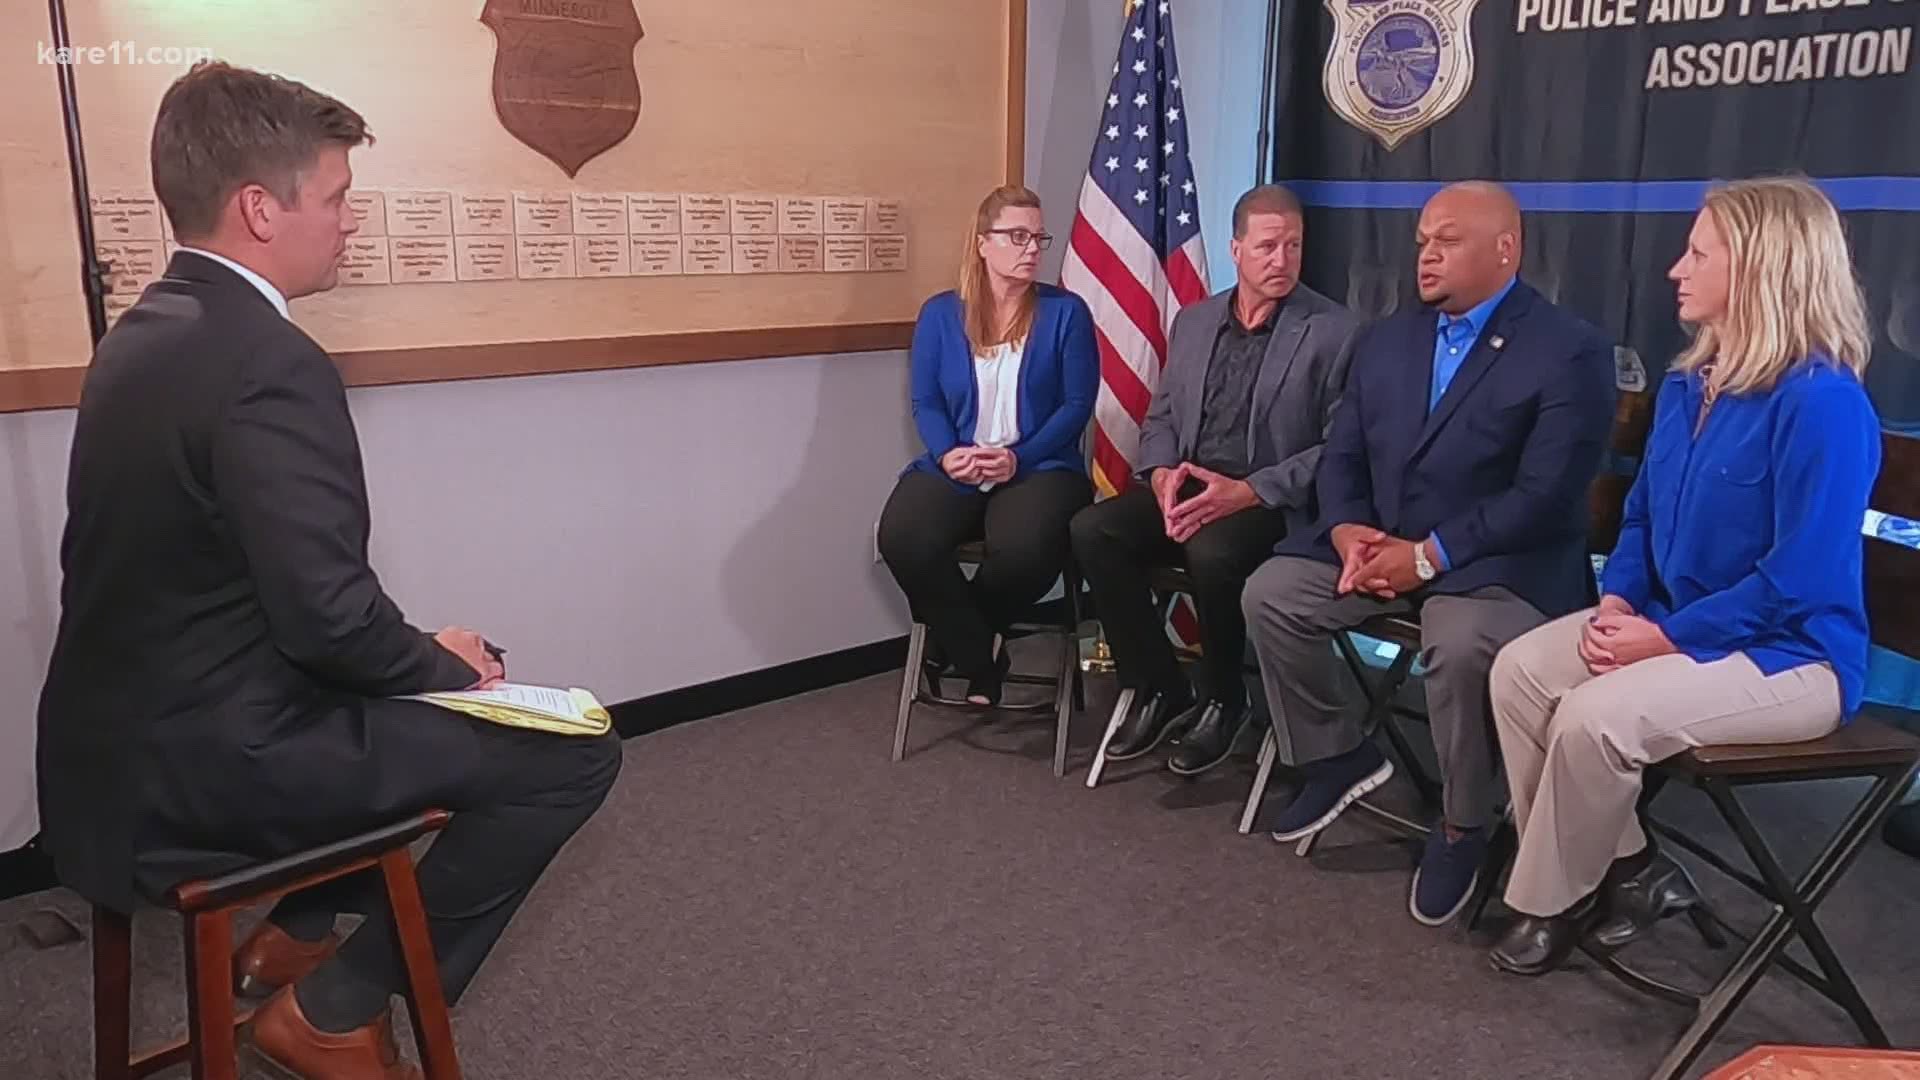 The controversial head of the Minneapolis Police Federation sat down to discuss his reaction to George Floyd's death, police reform, and whether he should resign.